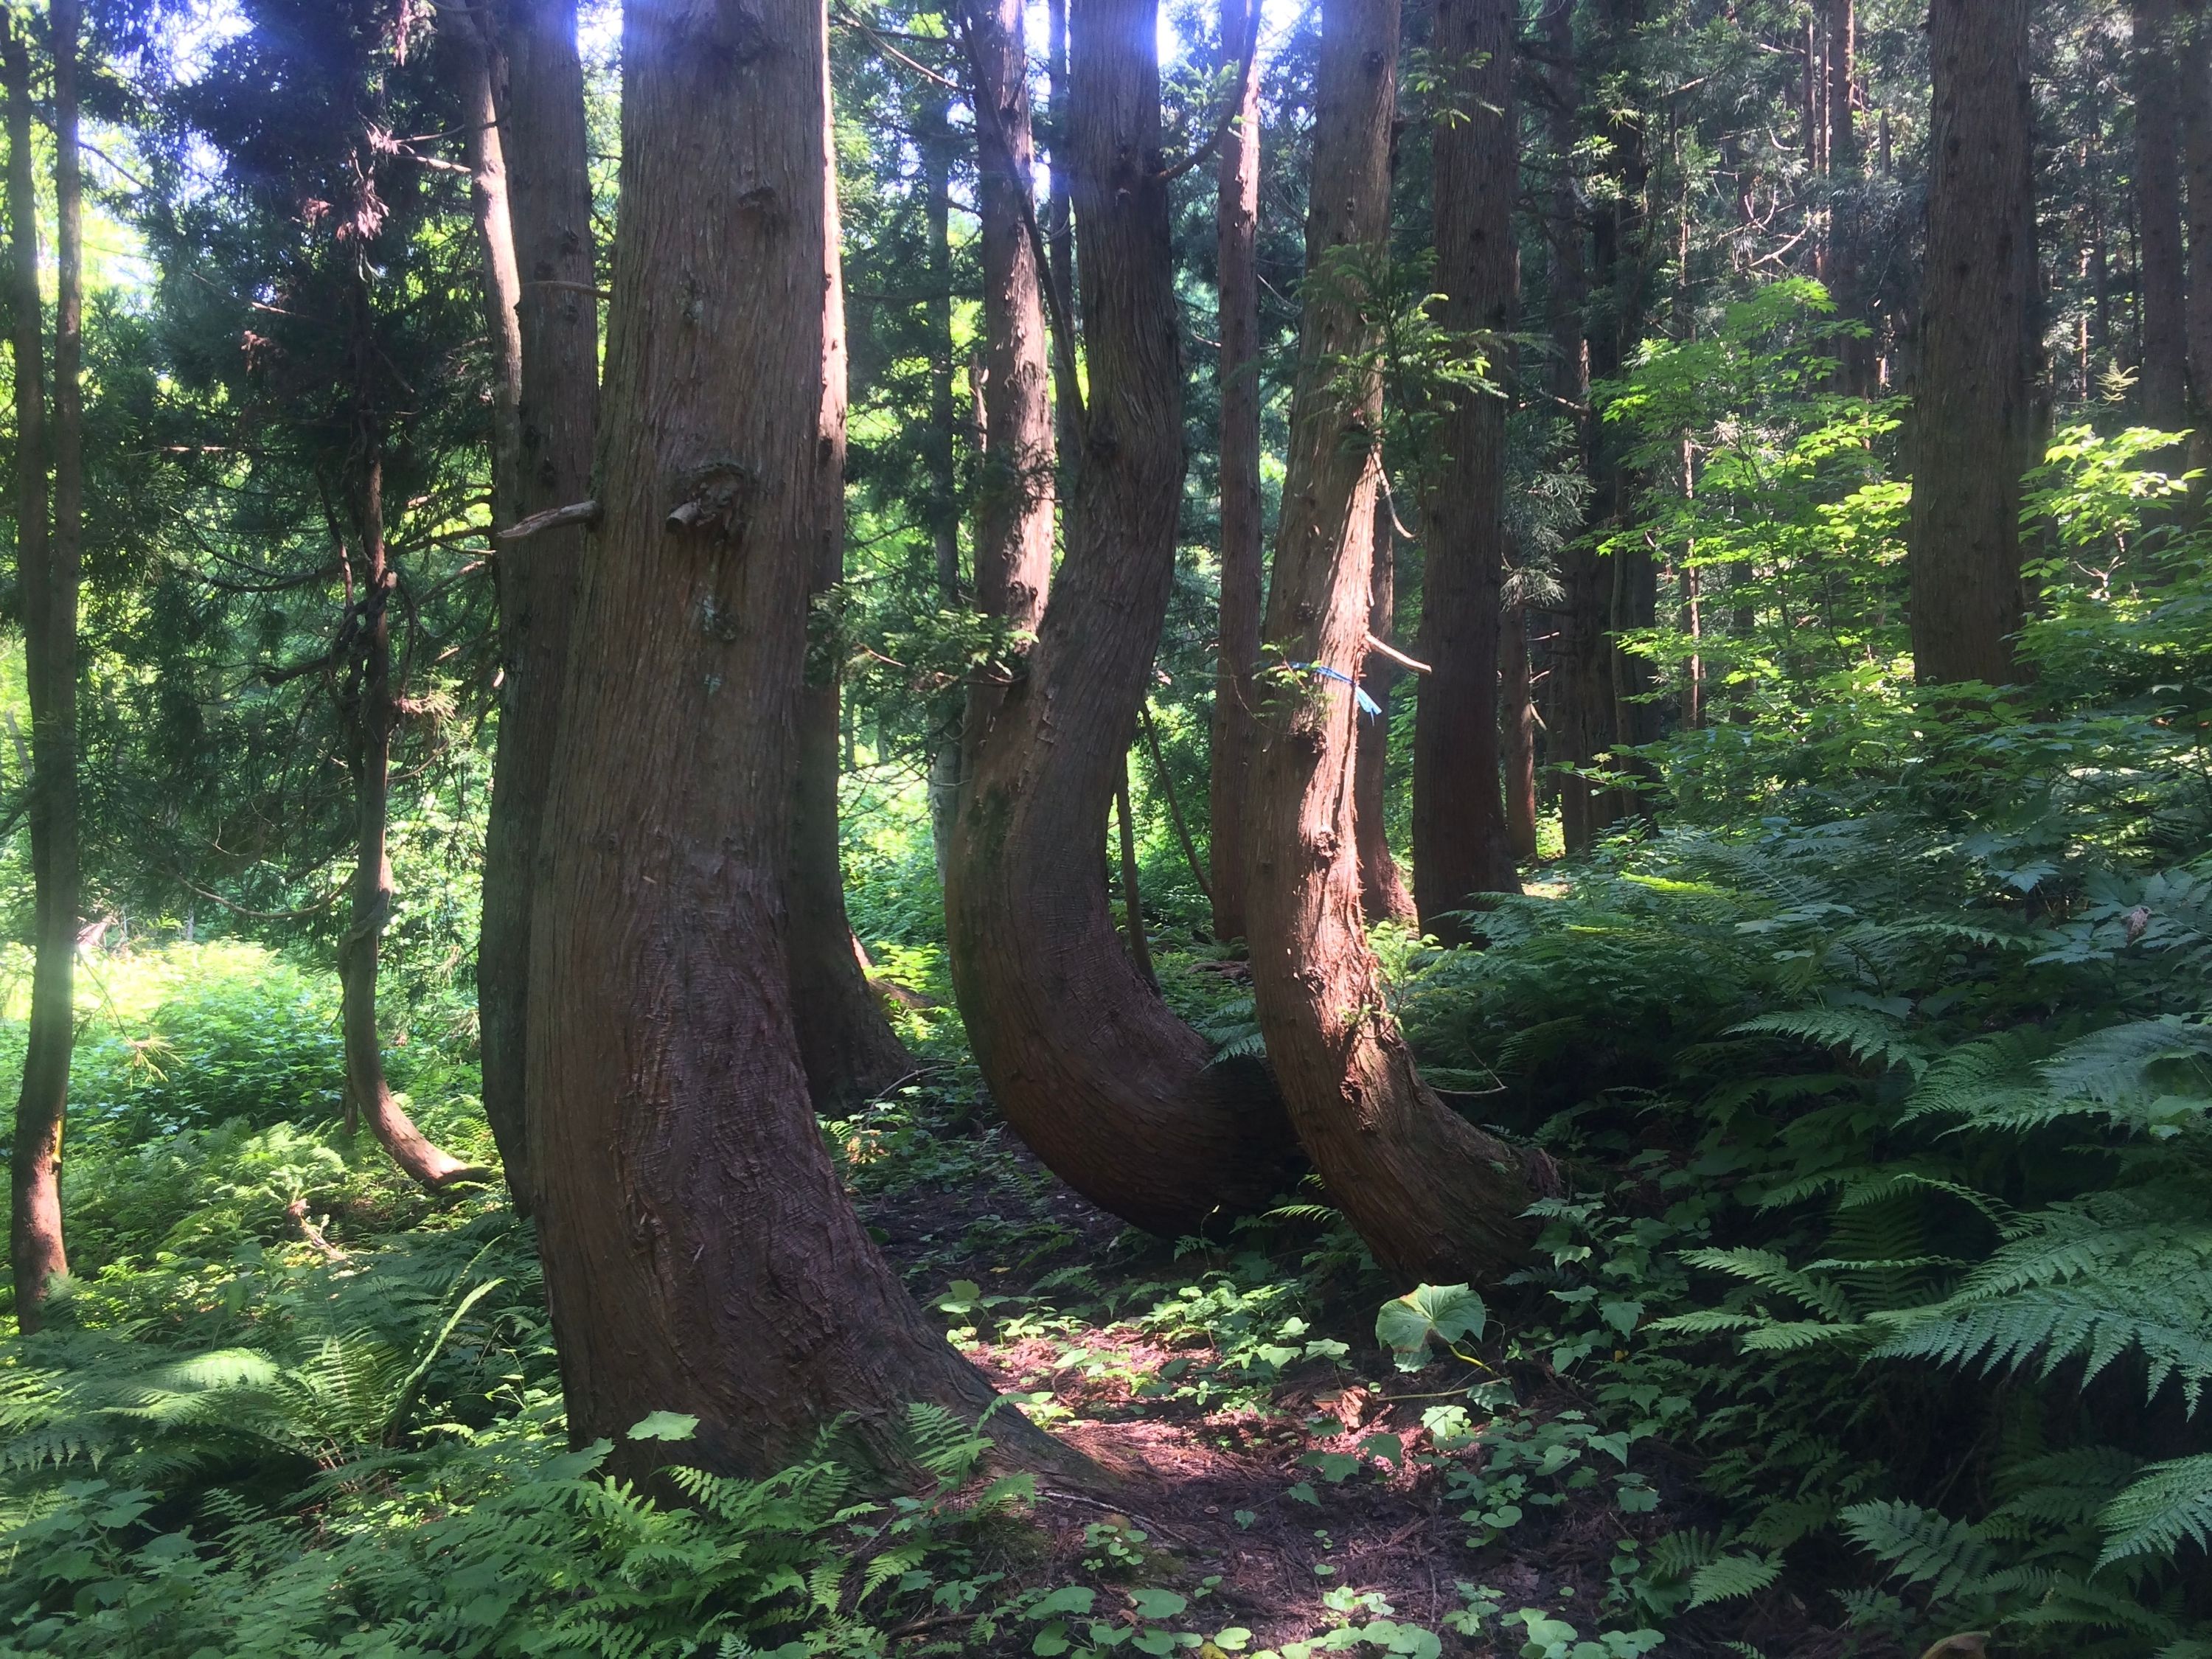 A cluster of cedars with curved trunks in a sunny forest.